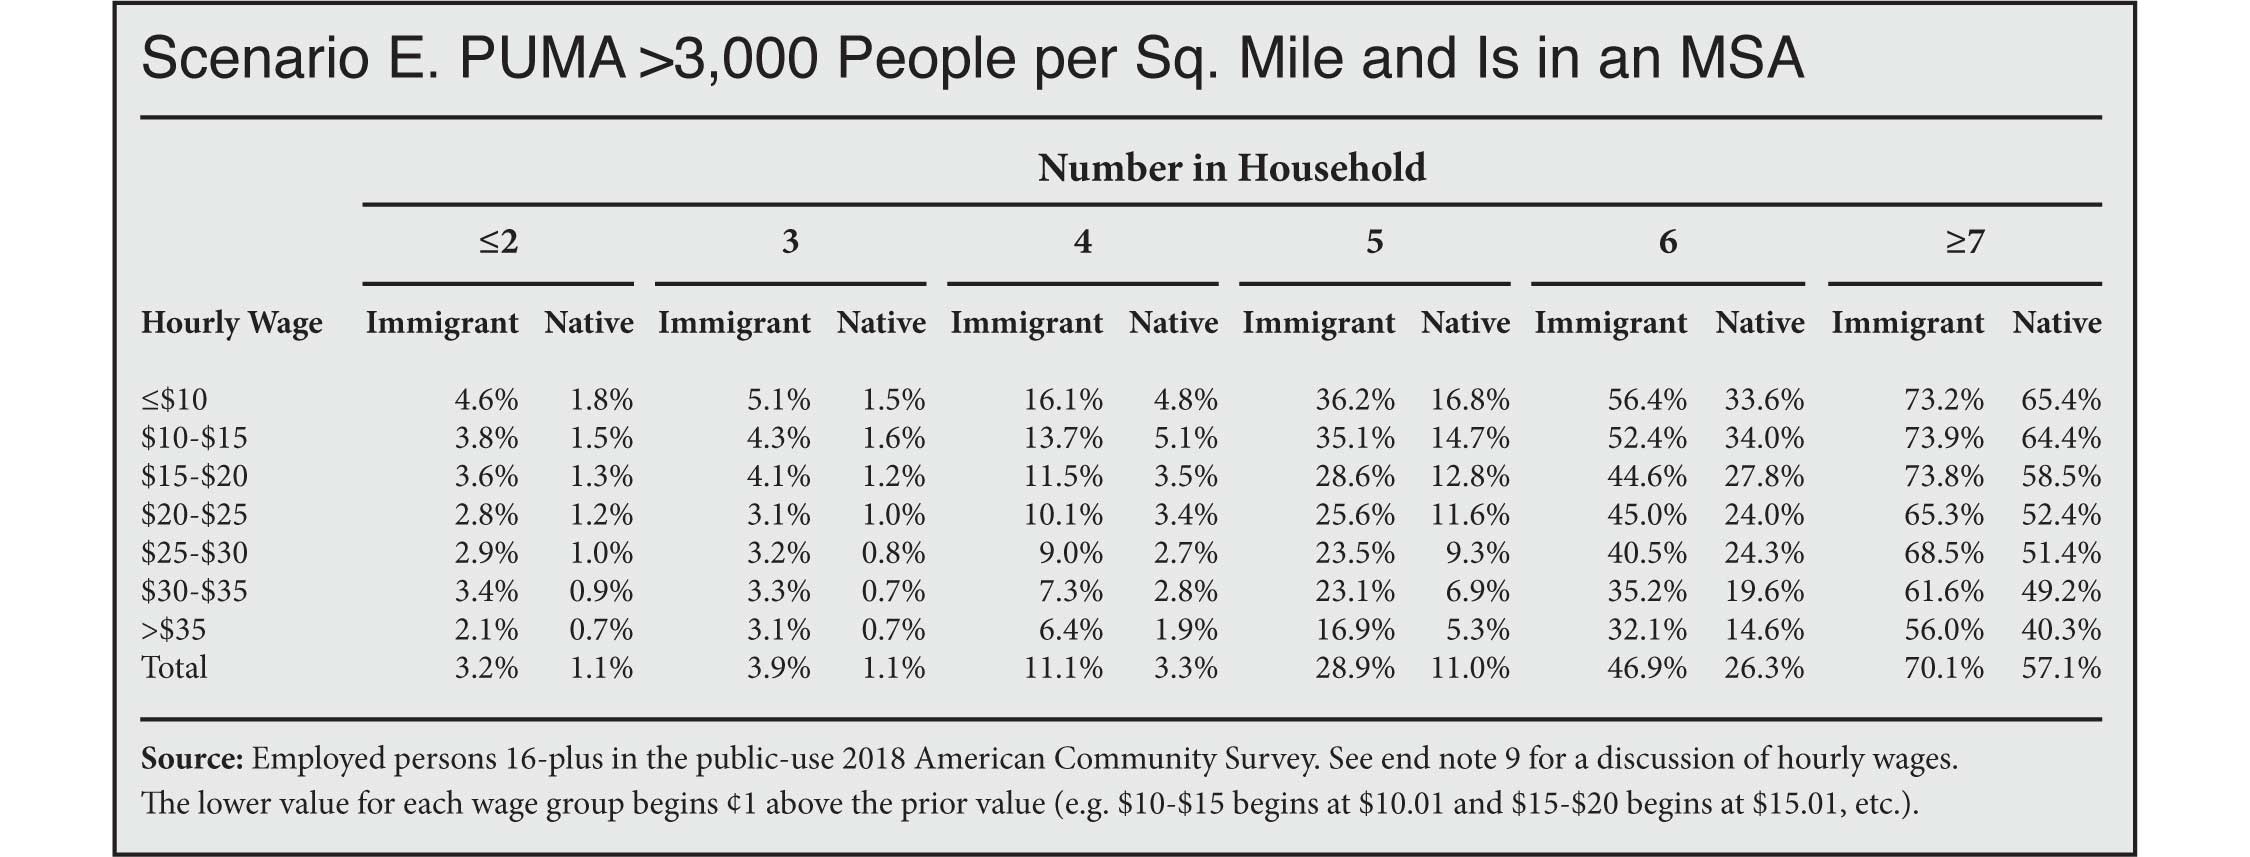 Table: Overcrowding for Immigrant & Native-Born Workers Ages 25 & Older by Wage, Household Size, & Population Density, PUMA >3000 people per square mile and is in an MSA